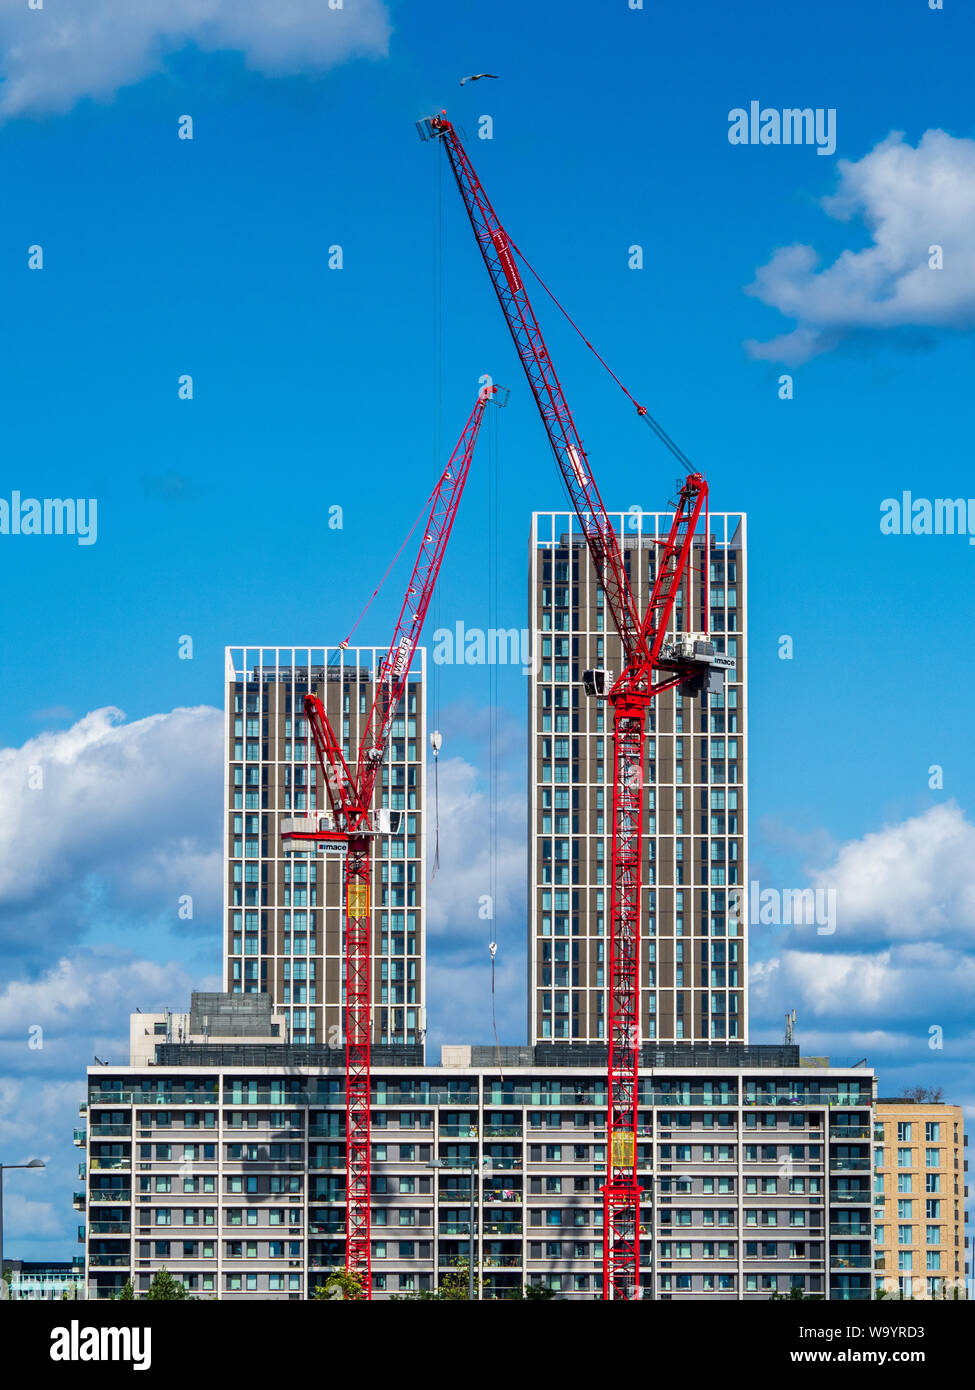 East Village London. Building Construction at the East Village Stratford residential development on the site of the 2012 Olympics athletes village. Stock Photo